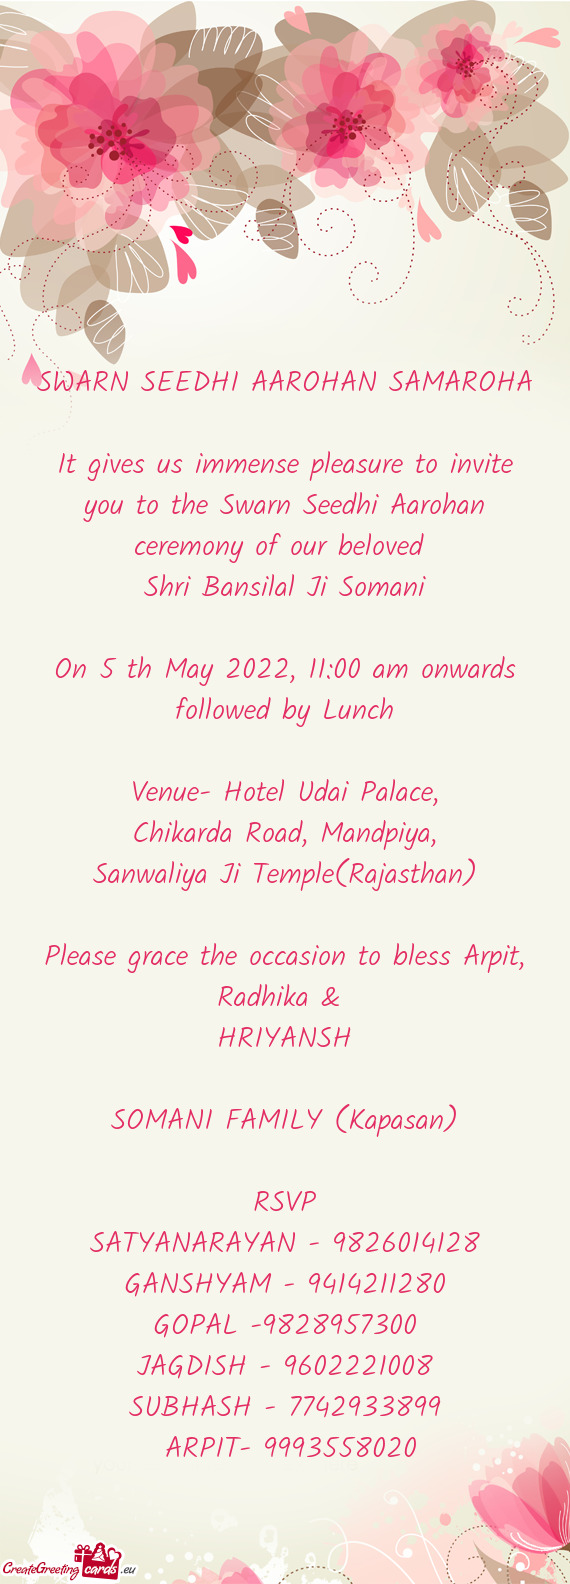 Please grace the occasion to bless Arpit, Radhika &